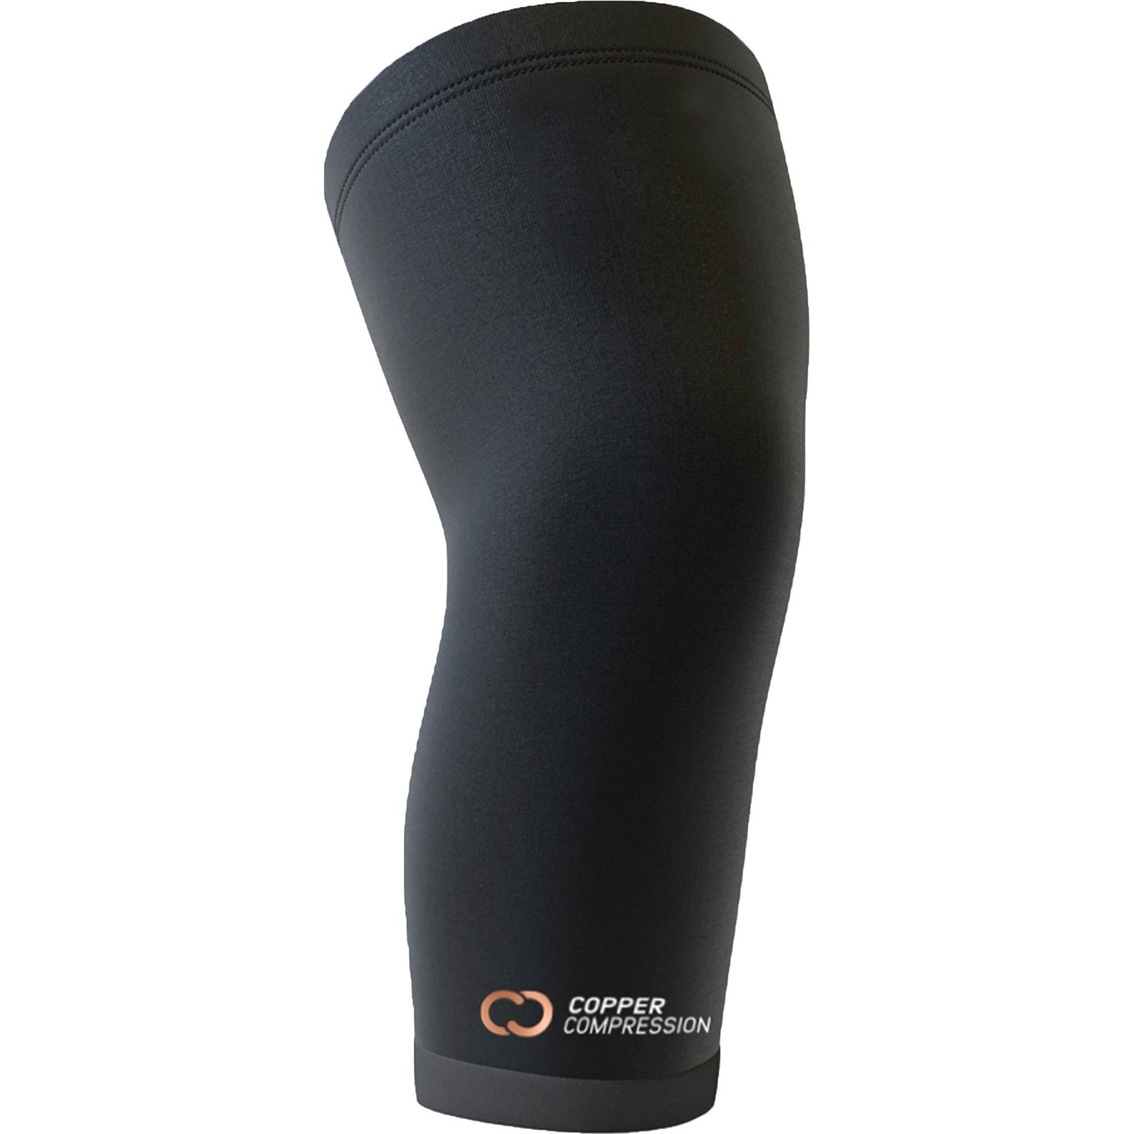 Copper Compression Knee Sleeve